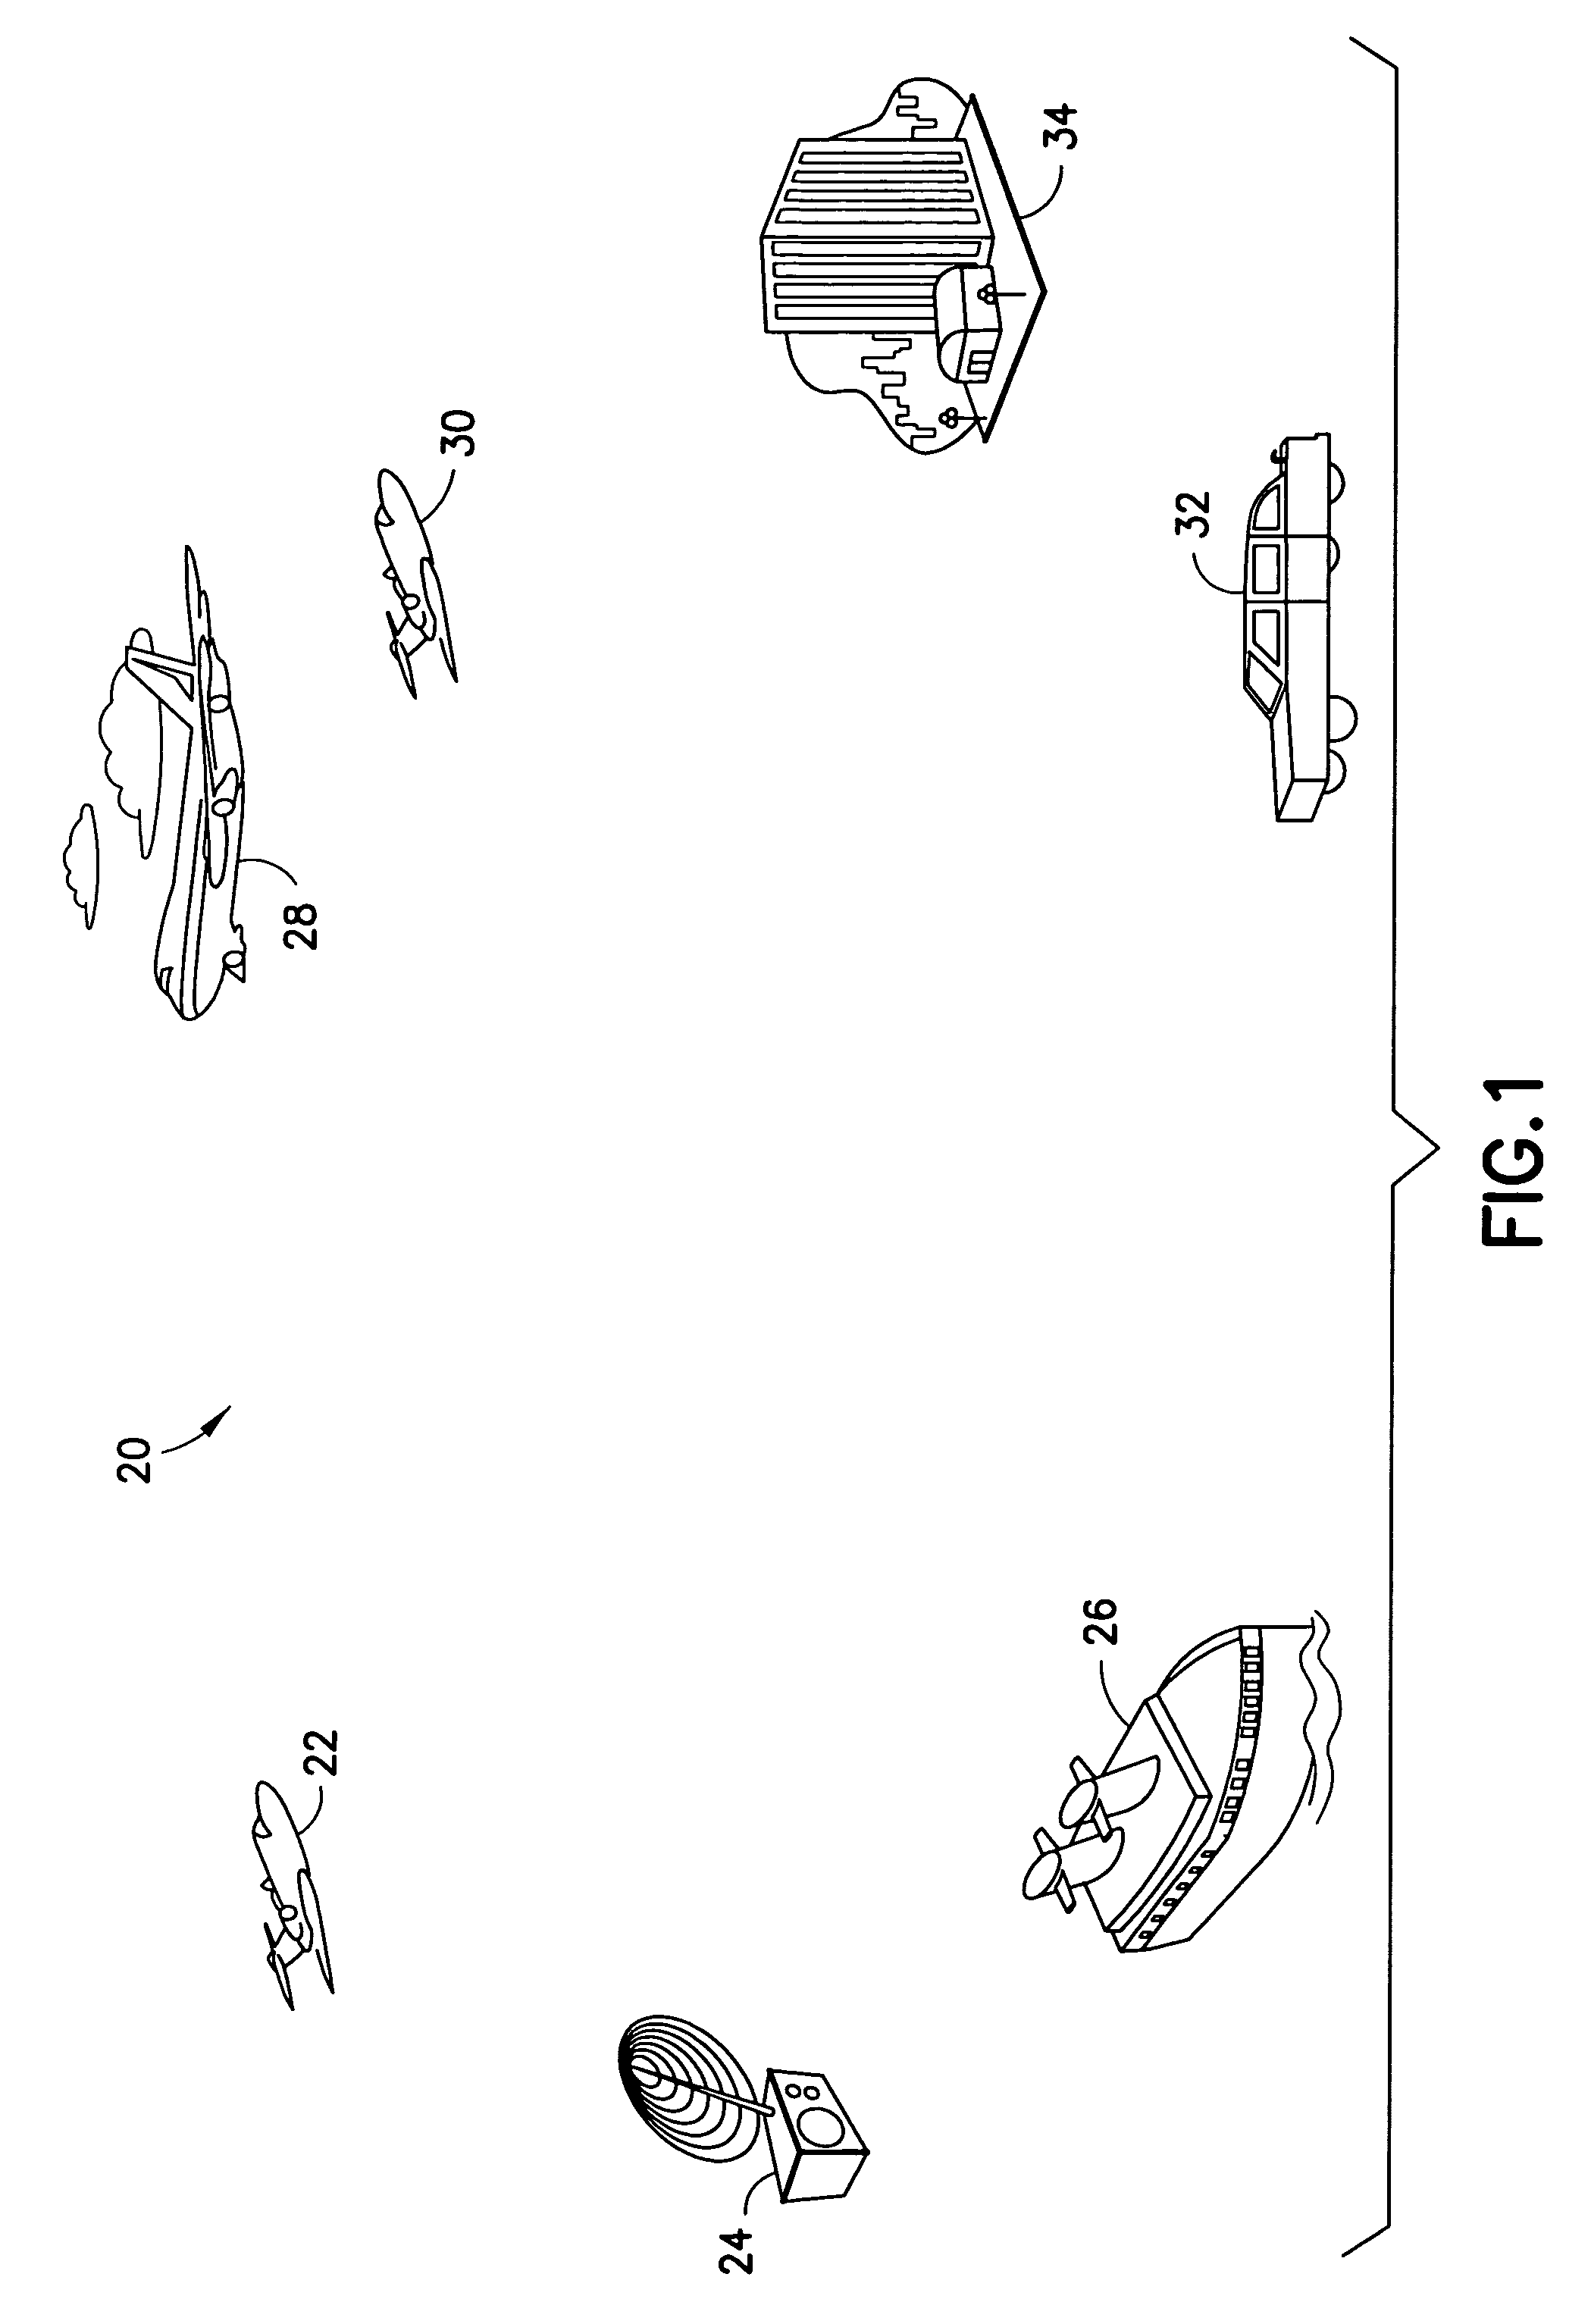 Non-coherent multiuser receiver and method for aiding carrier acquisition in a spread spectrum system